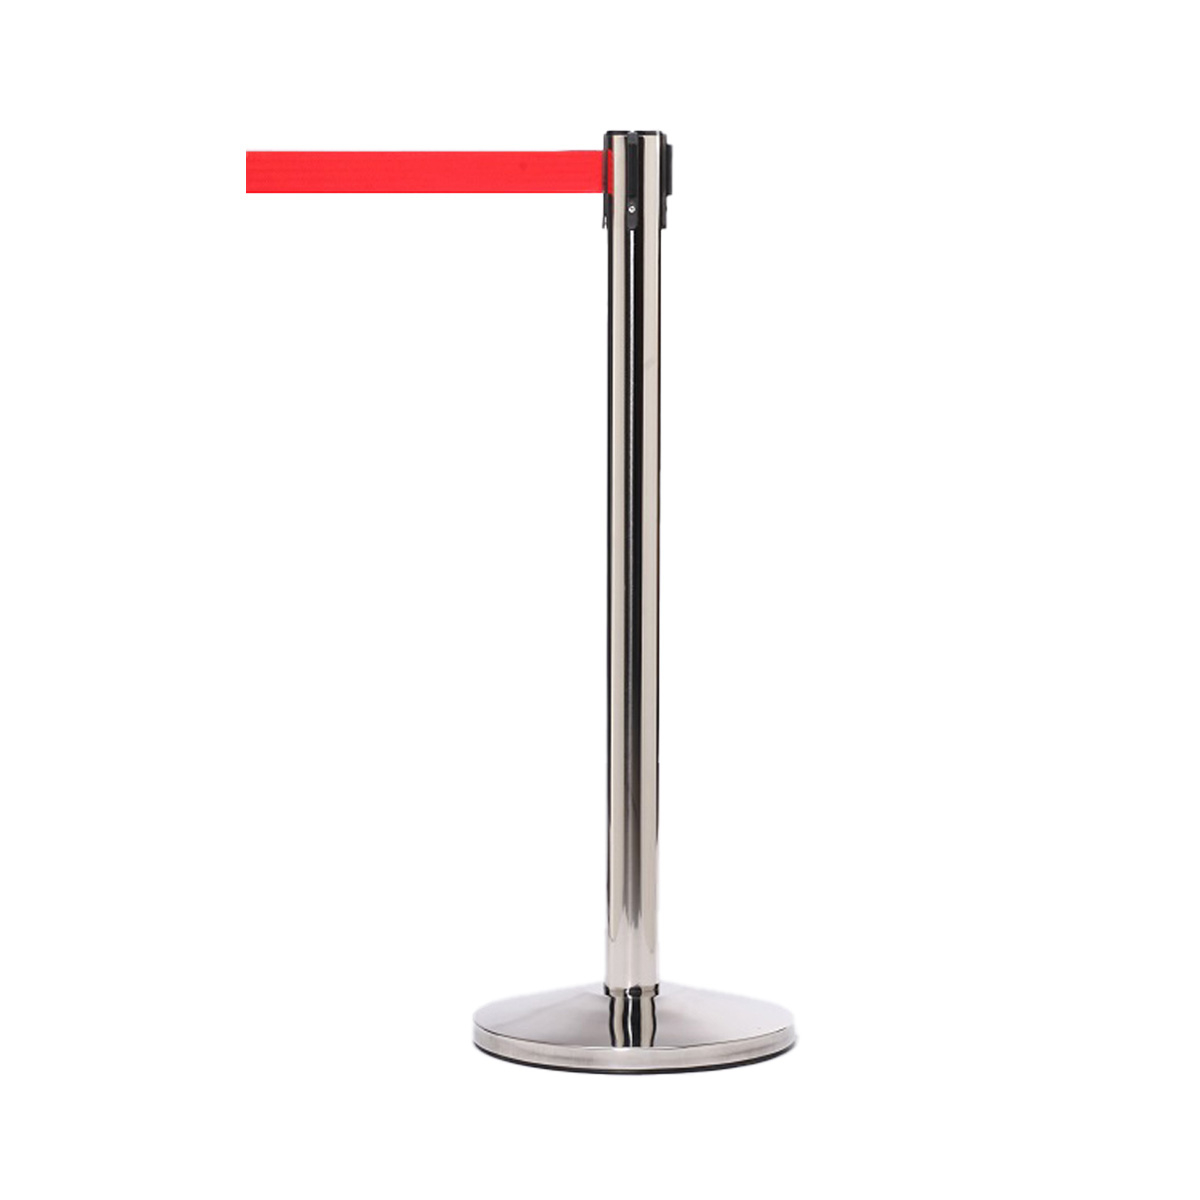 QueueMaster Belt Barriers With Red Belt and Stainless Steel Post